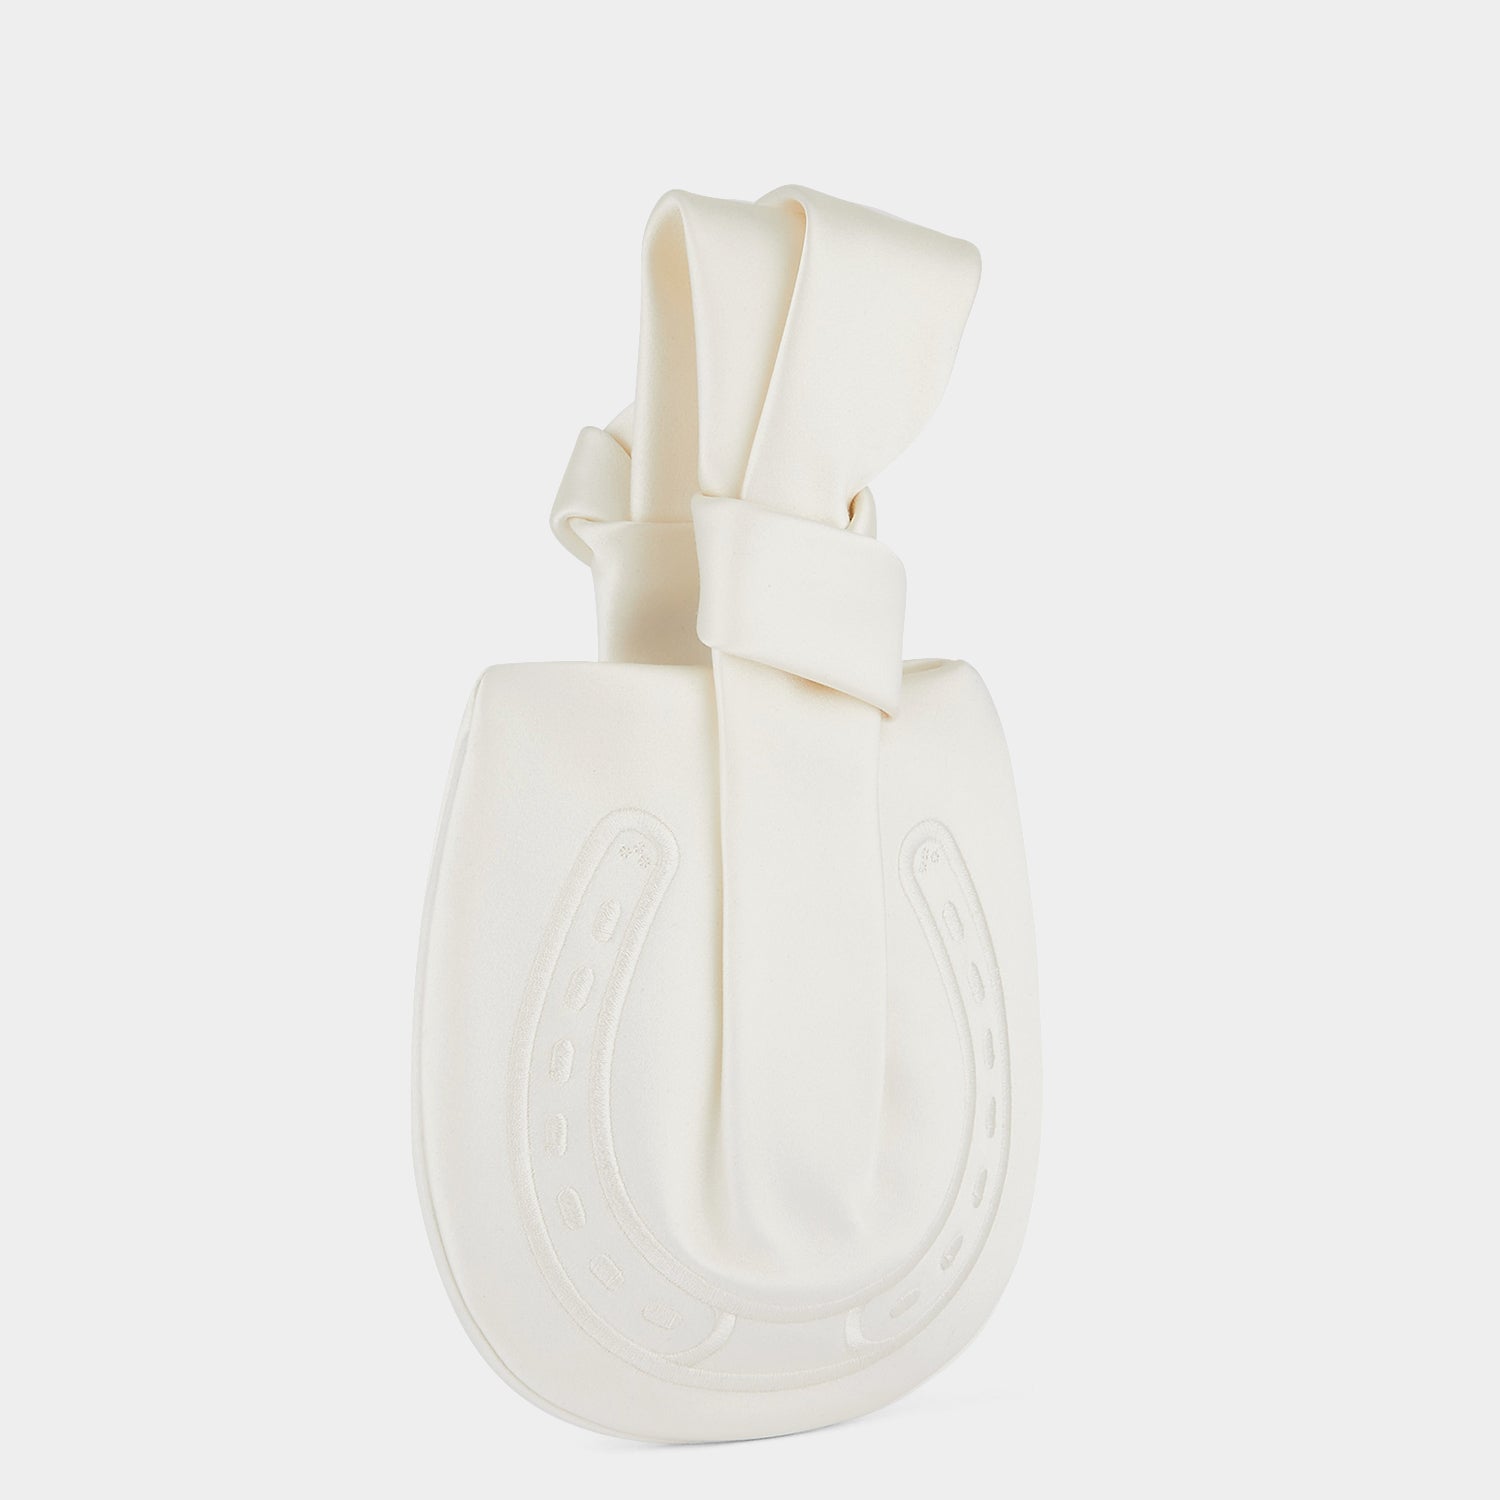 「Tie the Knot」 クラッチ -

                  
                    Double Faced Satin in Ivory -
                  

                  Anya Hindmarch JP
